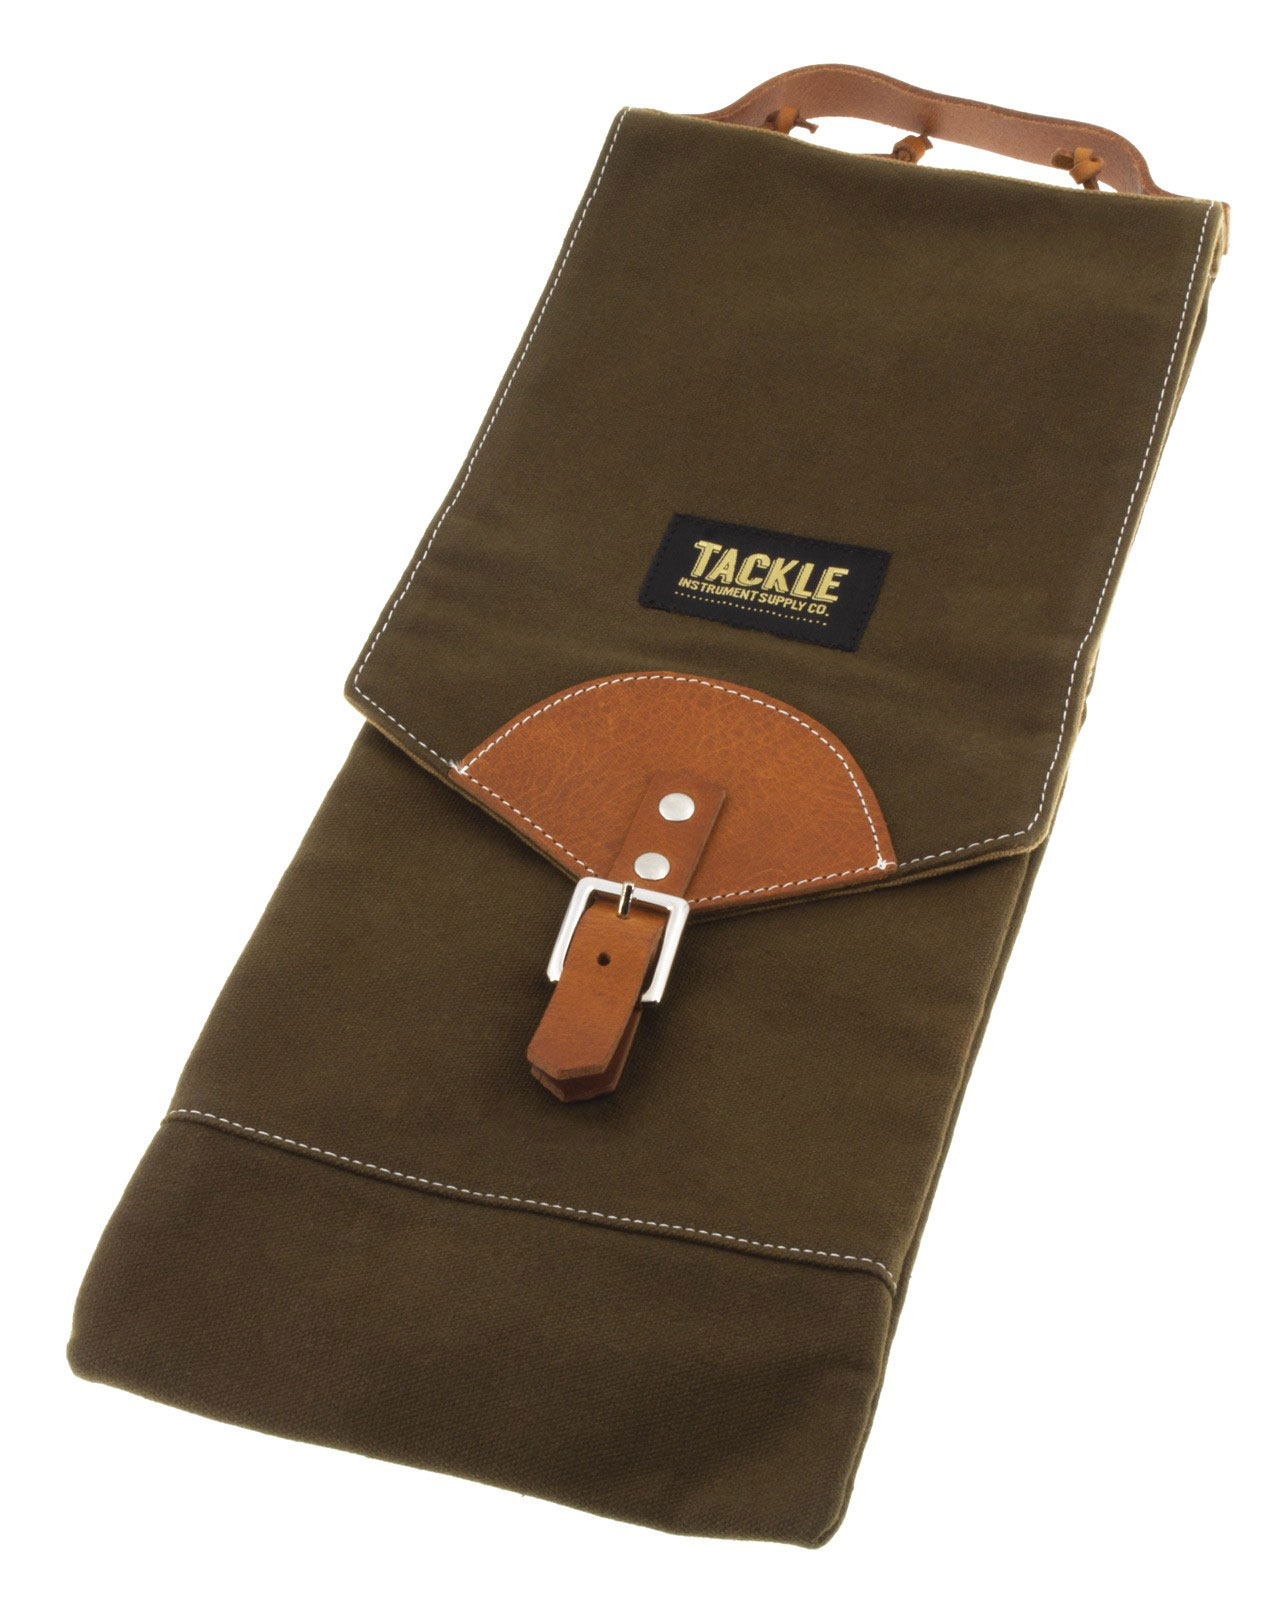 TACKLE INSTRUMENTS WAX CANVAS COMPACT STICK CASE - FOREST GREEN